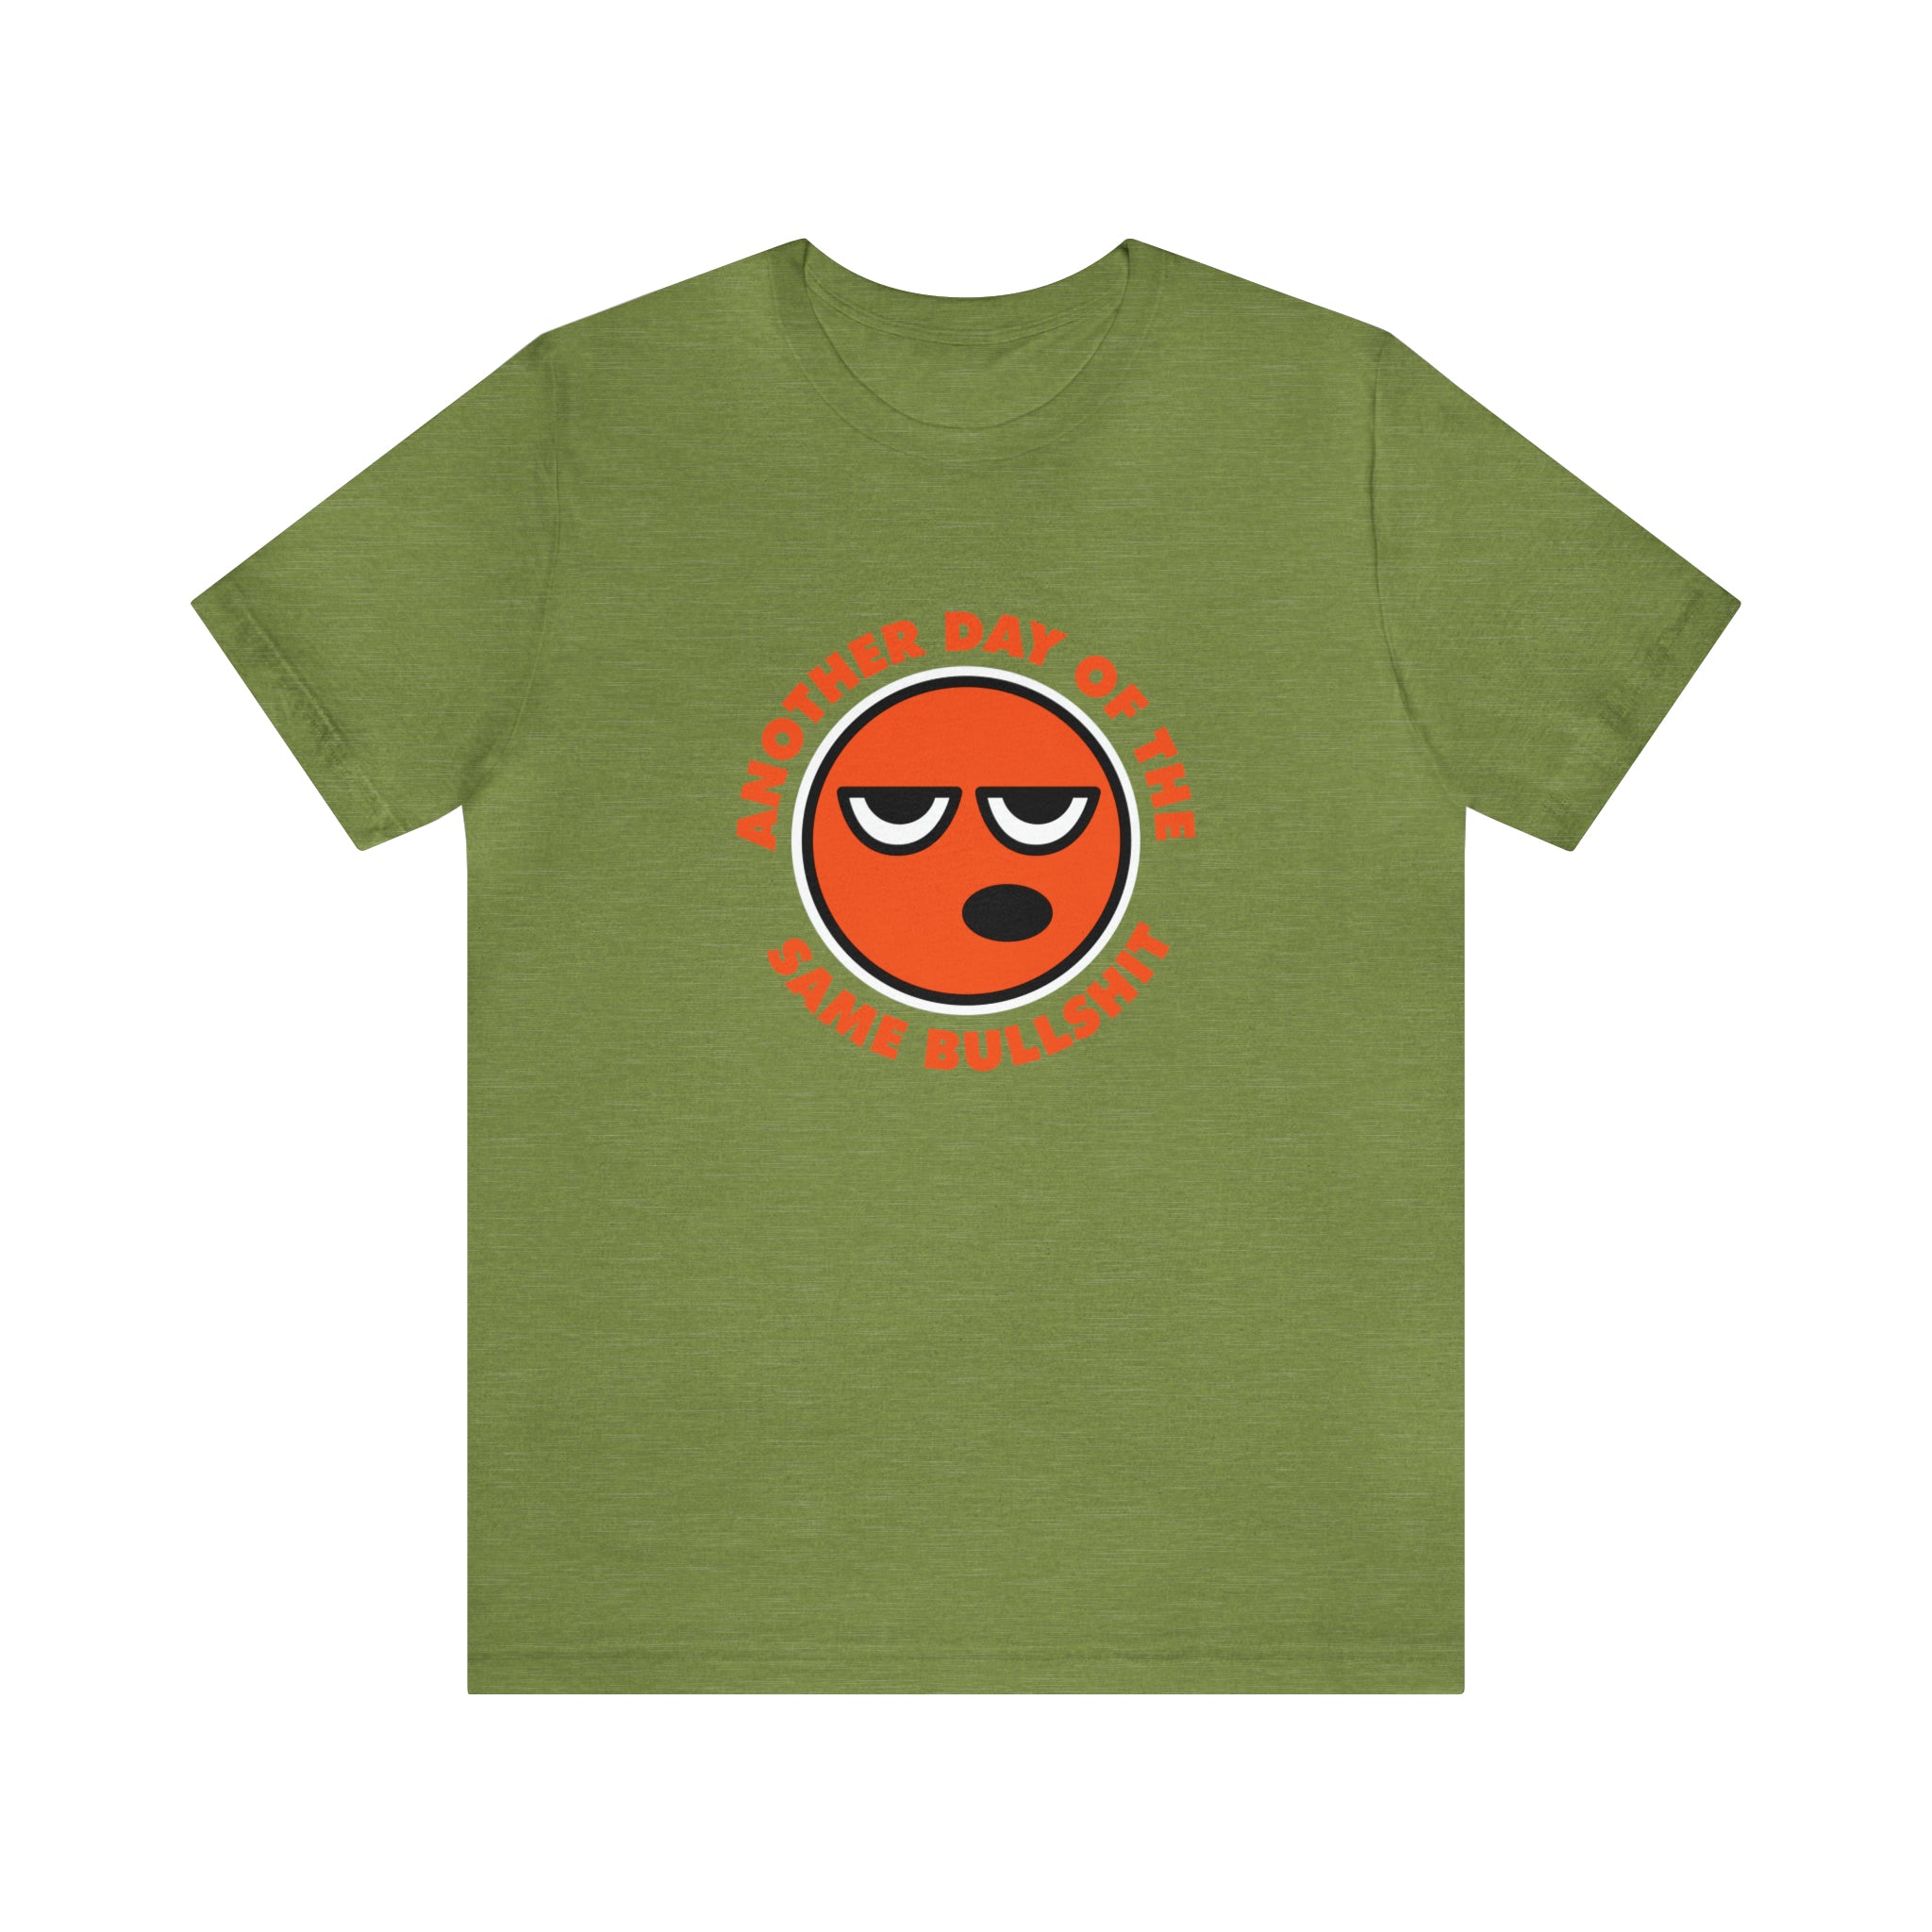 A "Another Day of the Same Bullshit" t-shirt with an orange face, conveying a playful attitude.